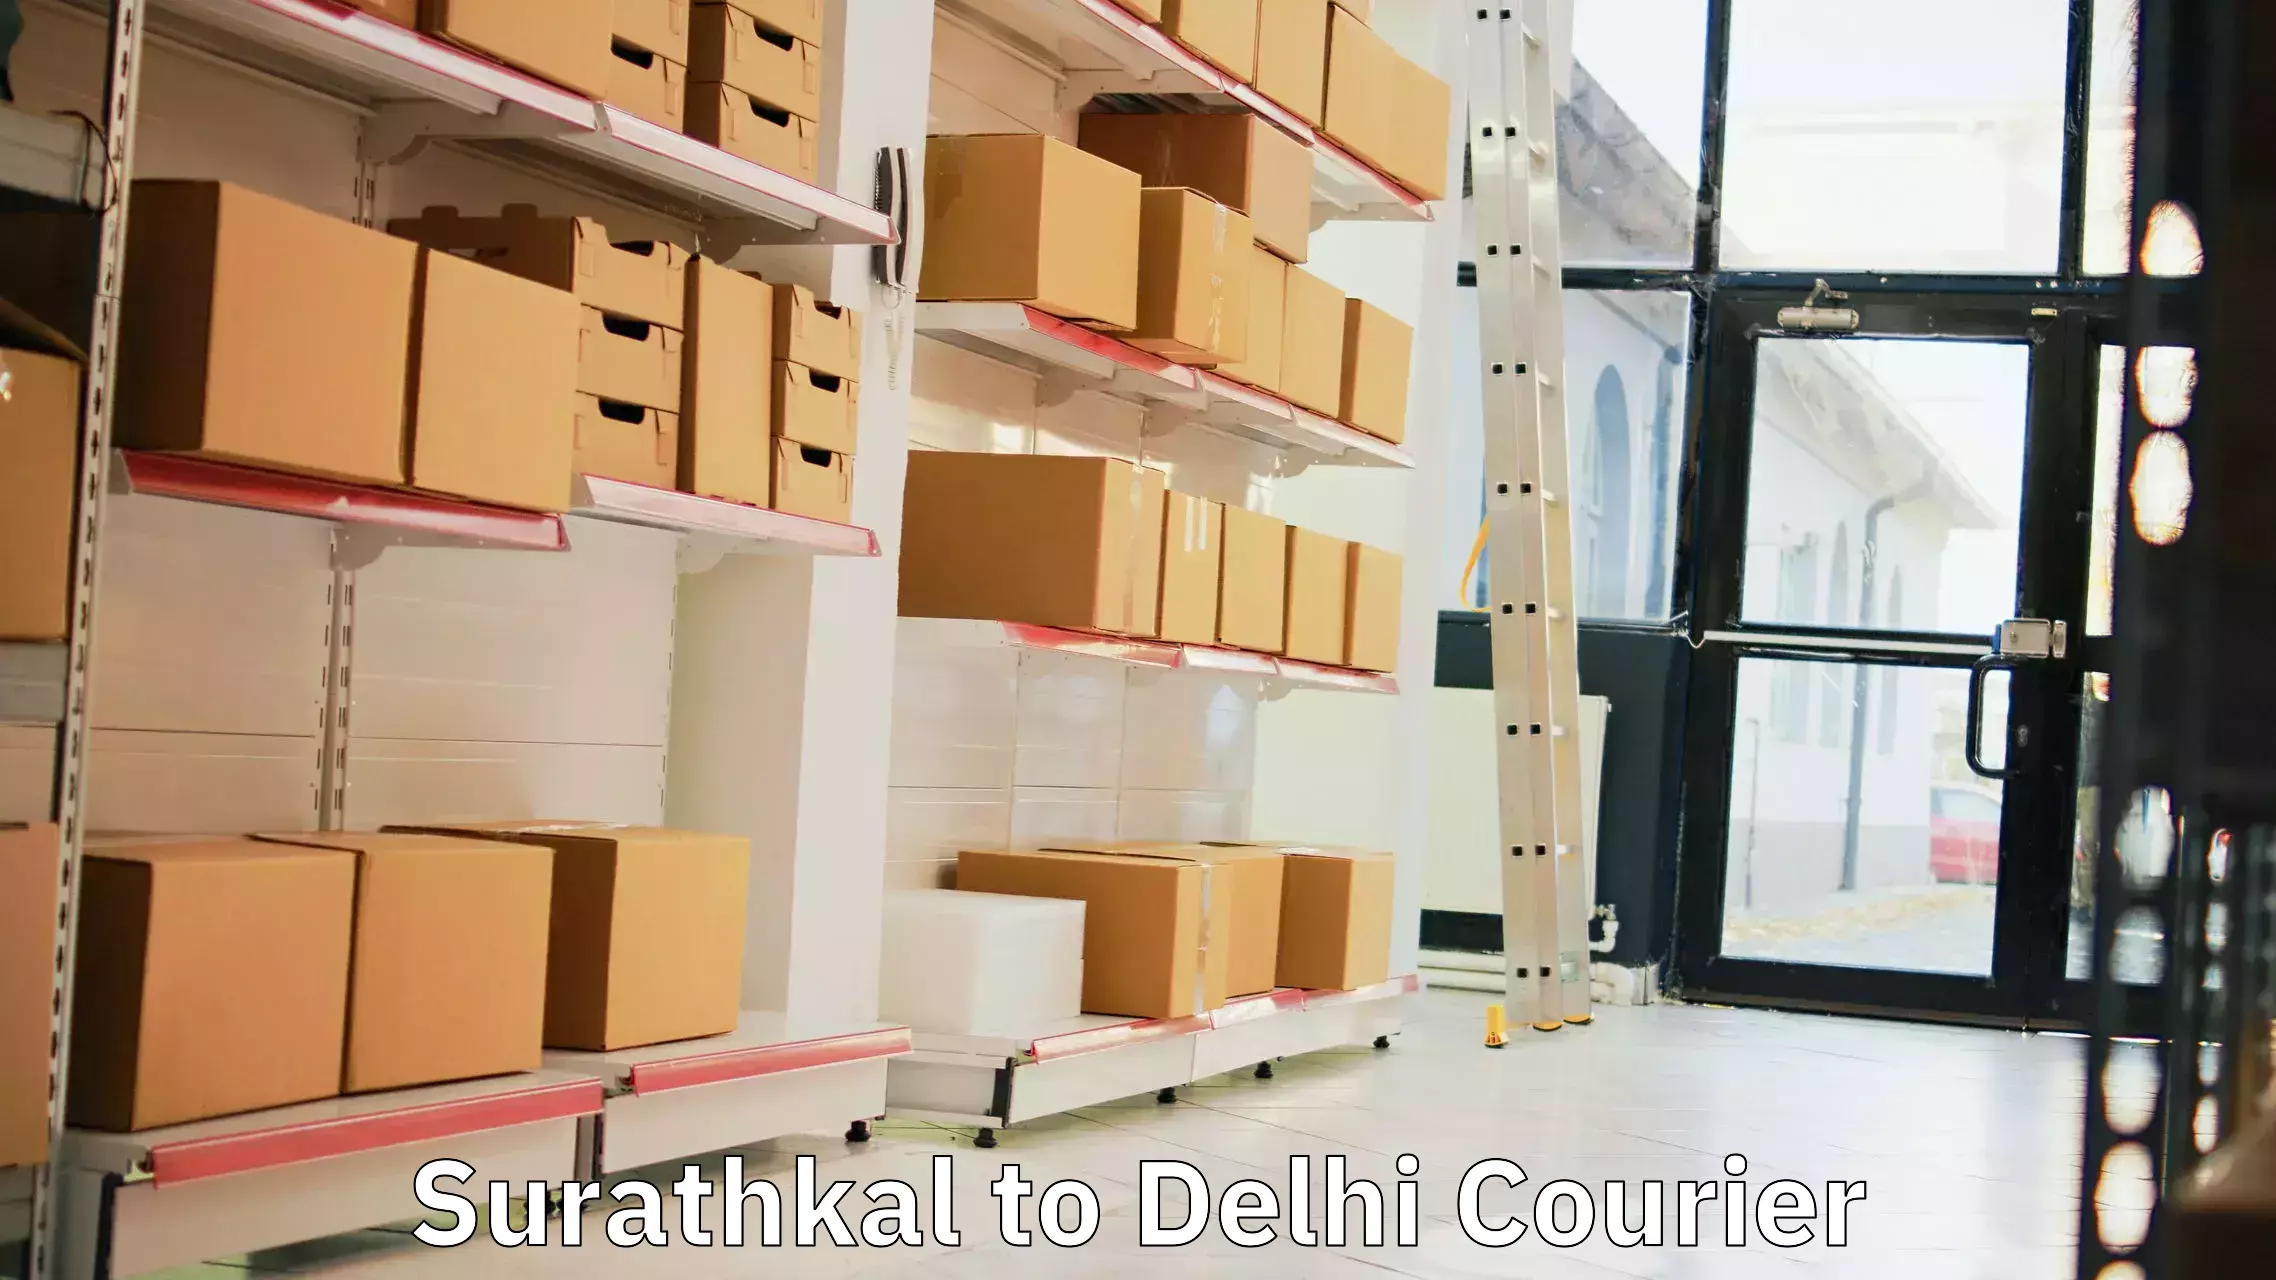 Global shipping networks Surathkal to East Delhi